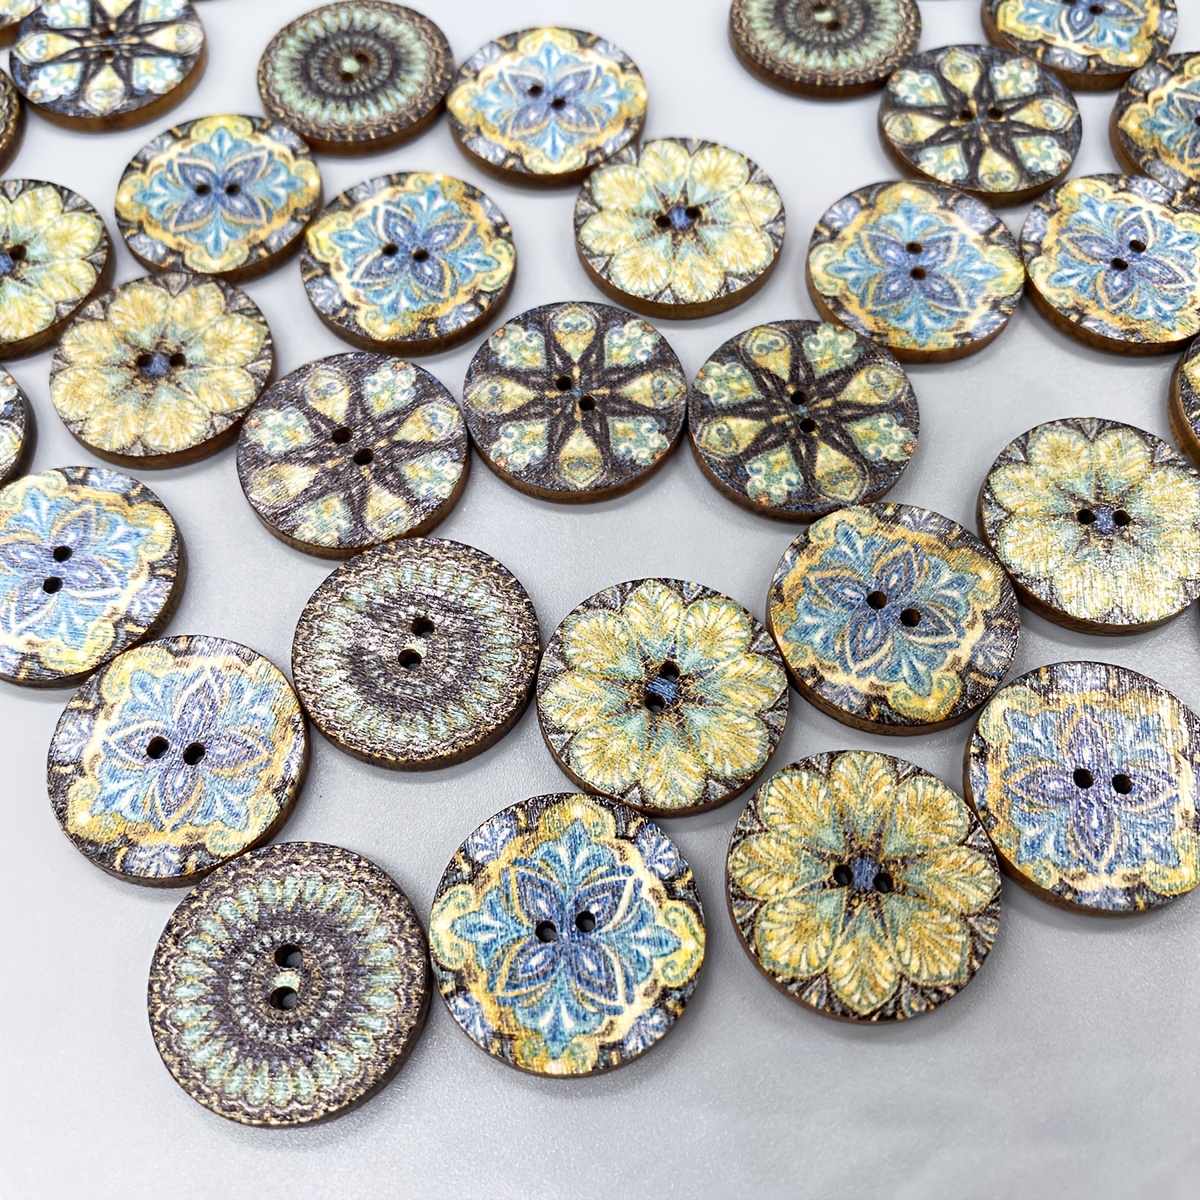 Wooden Buttons - Round Wood Buttons for Crafts Sewing Sweater by Mandala  Crafts, Natural Color Bulk 30 PCs 30mm 1.25 Inch Button with 4 Holes 